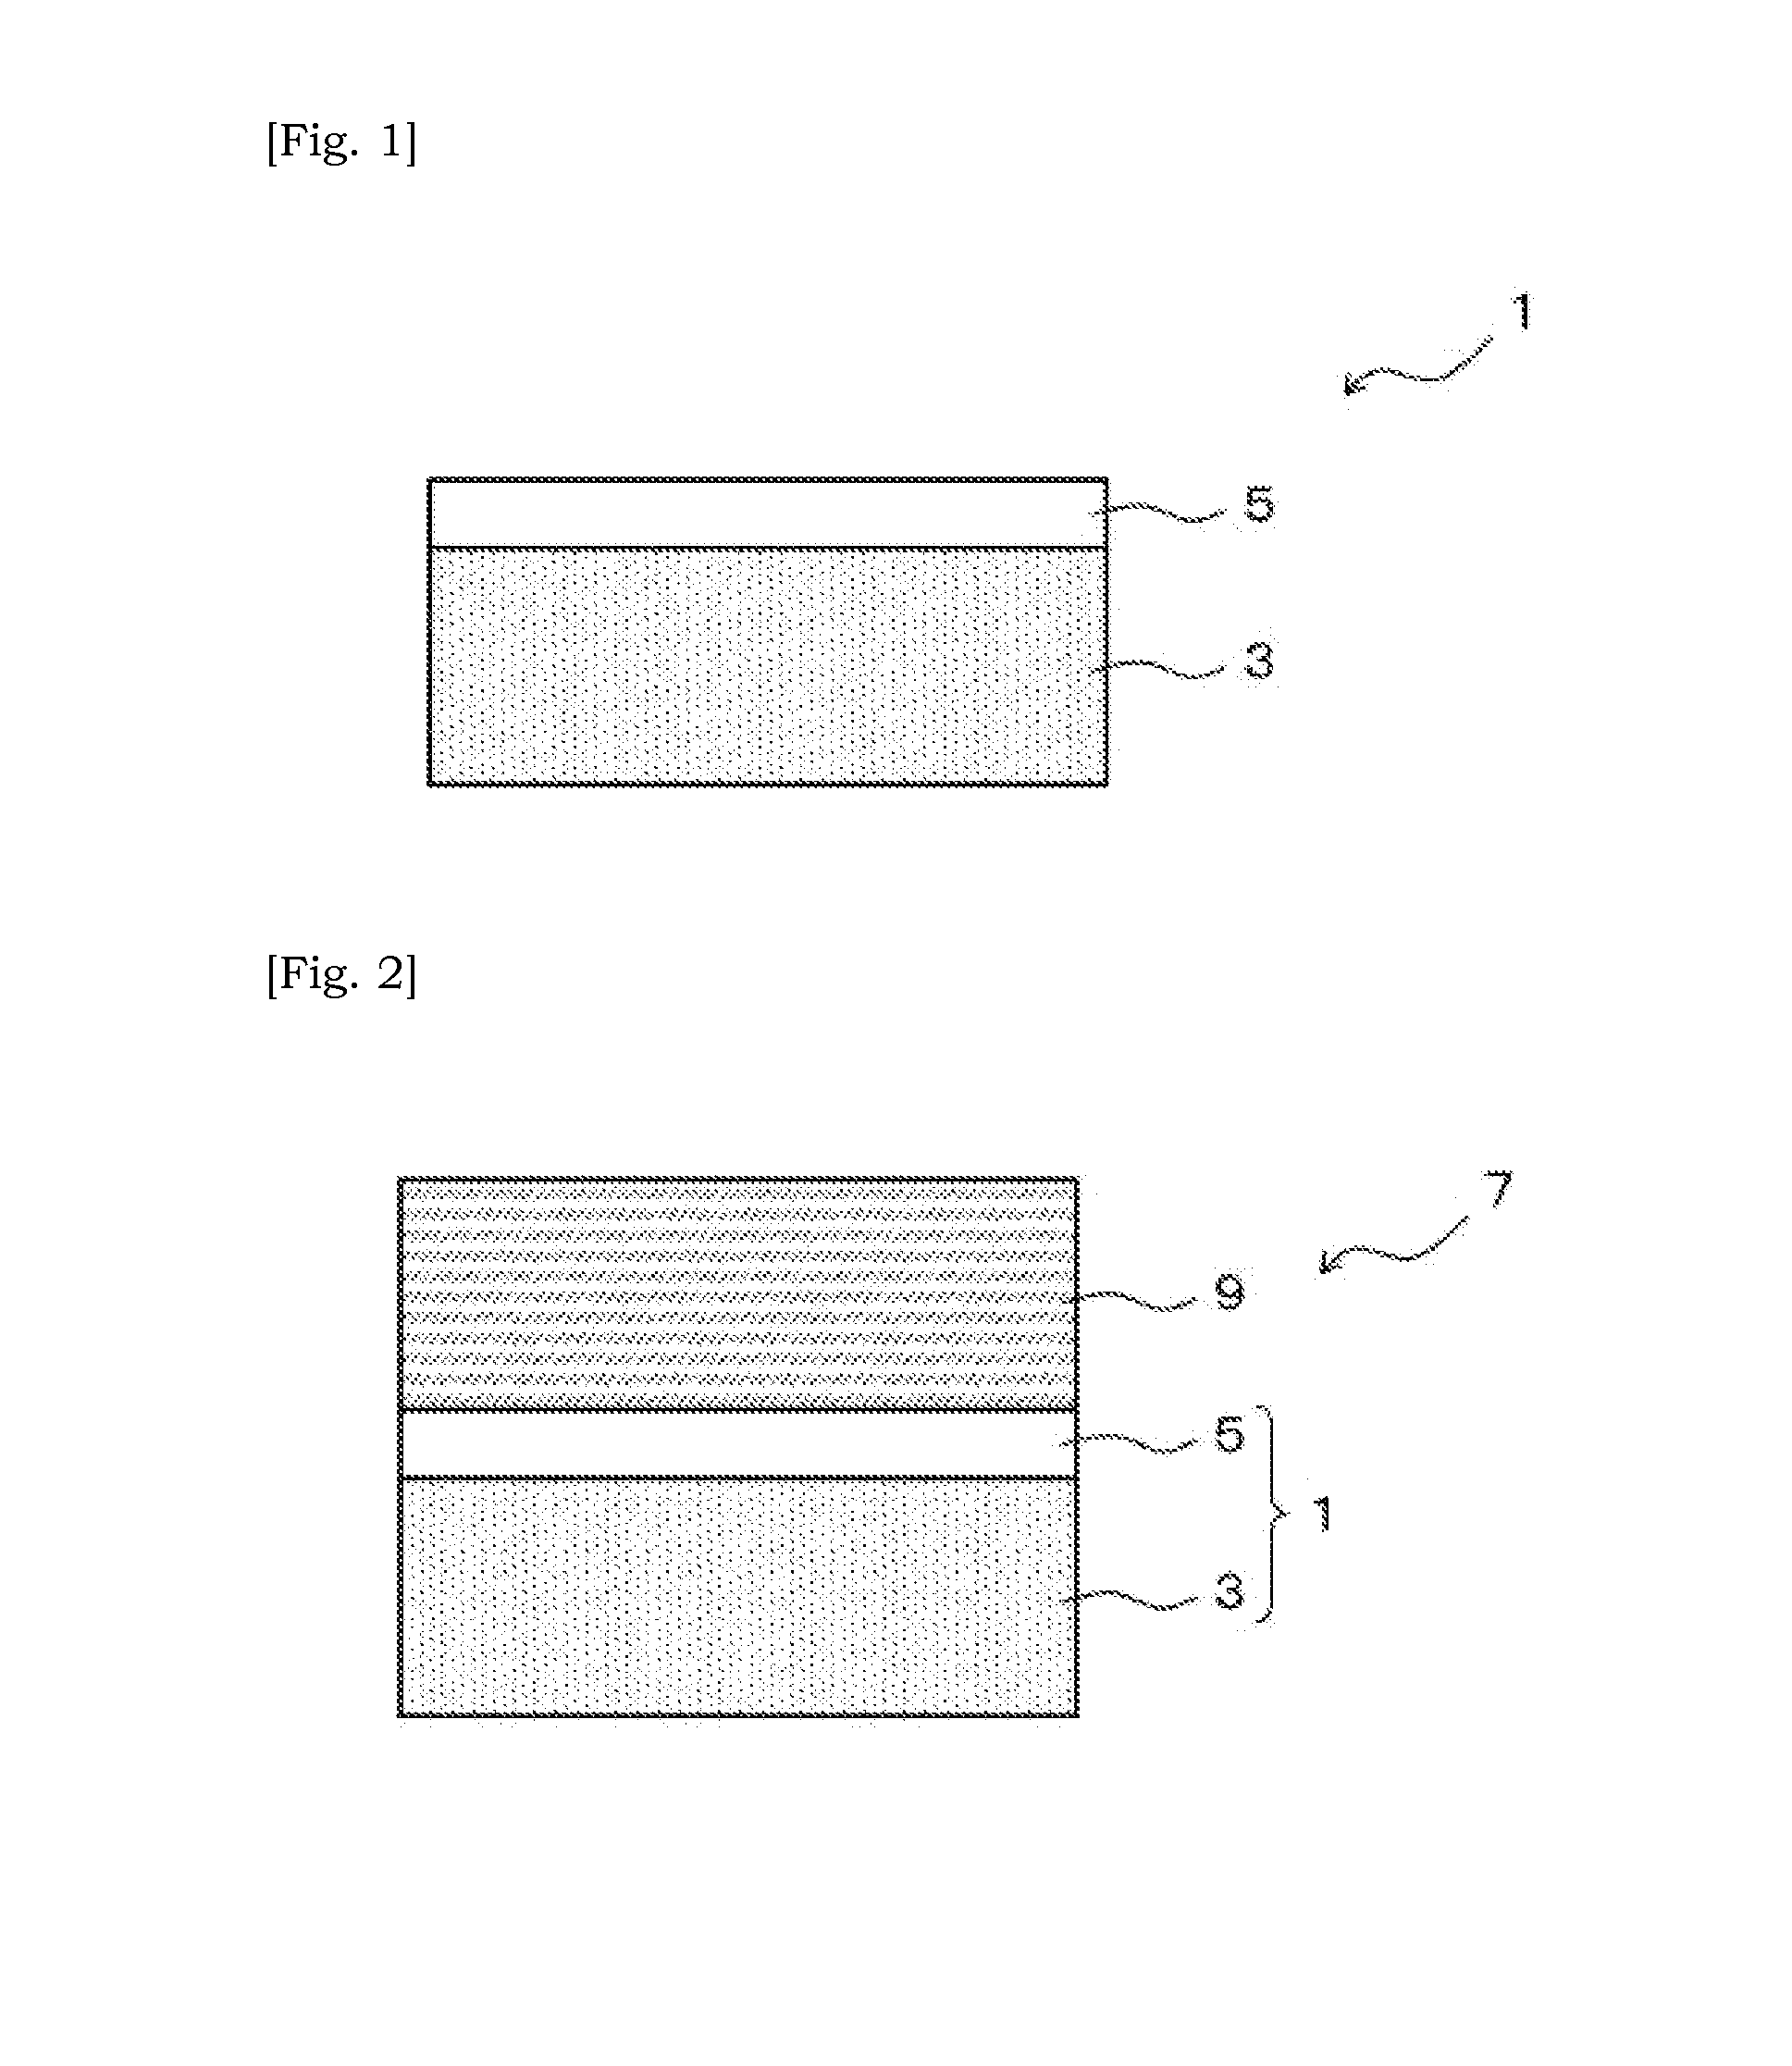 Collector,  electrode structure, non-aqueous electrolyte battery, and electrical storage device